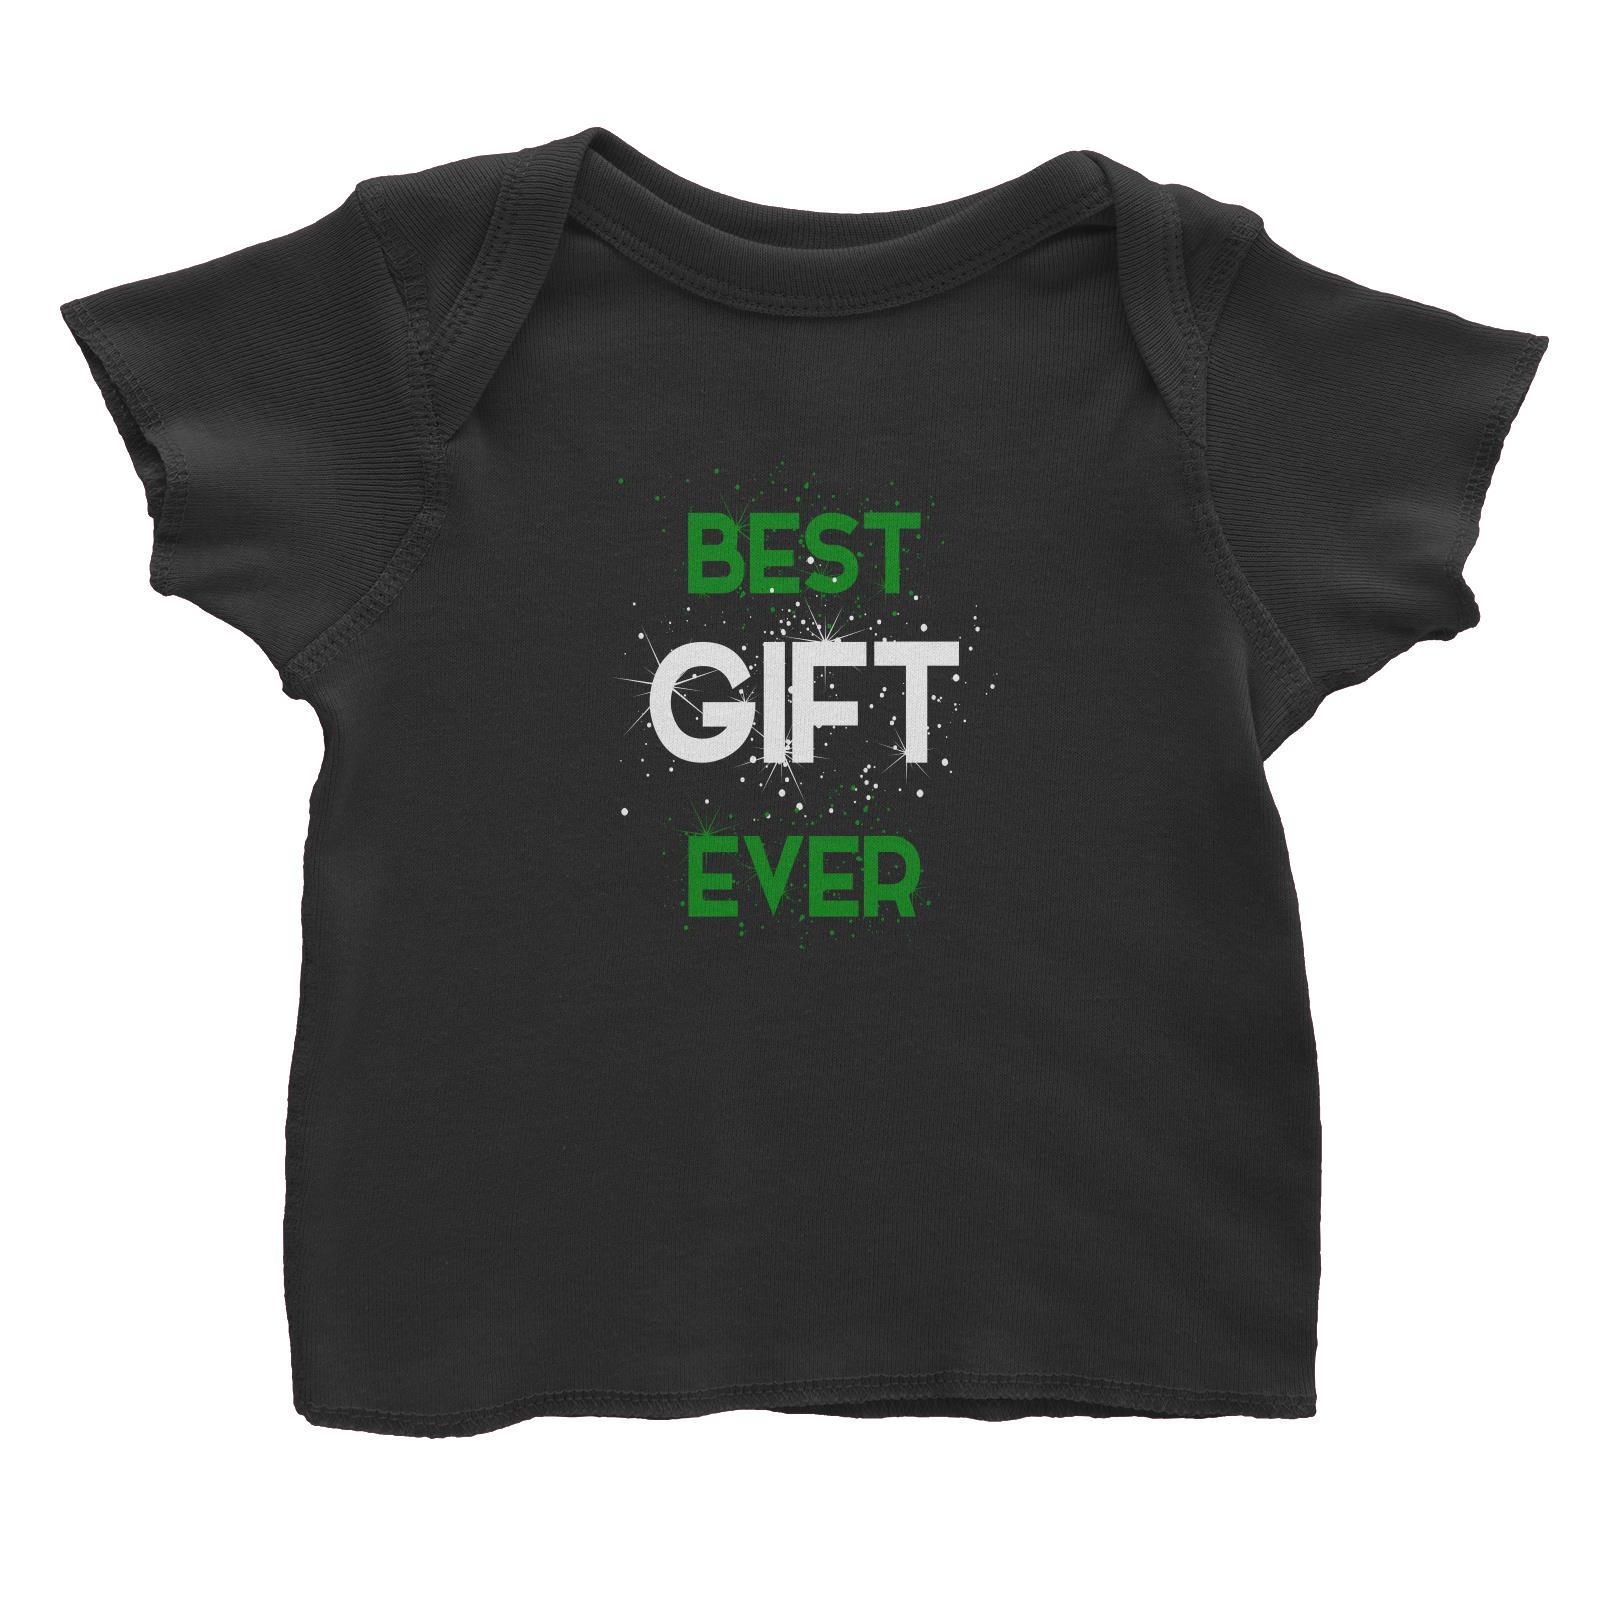 Best Gift Ever Baby T-Shirt Christmas Matching Family Lettering Funny Personalizable Designs